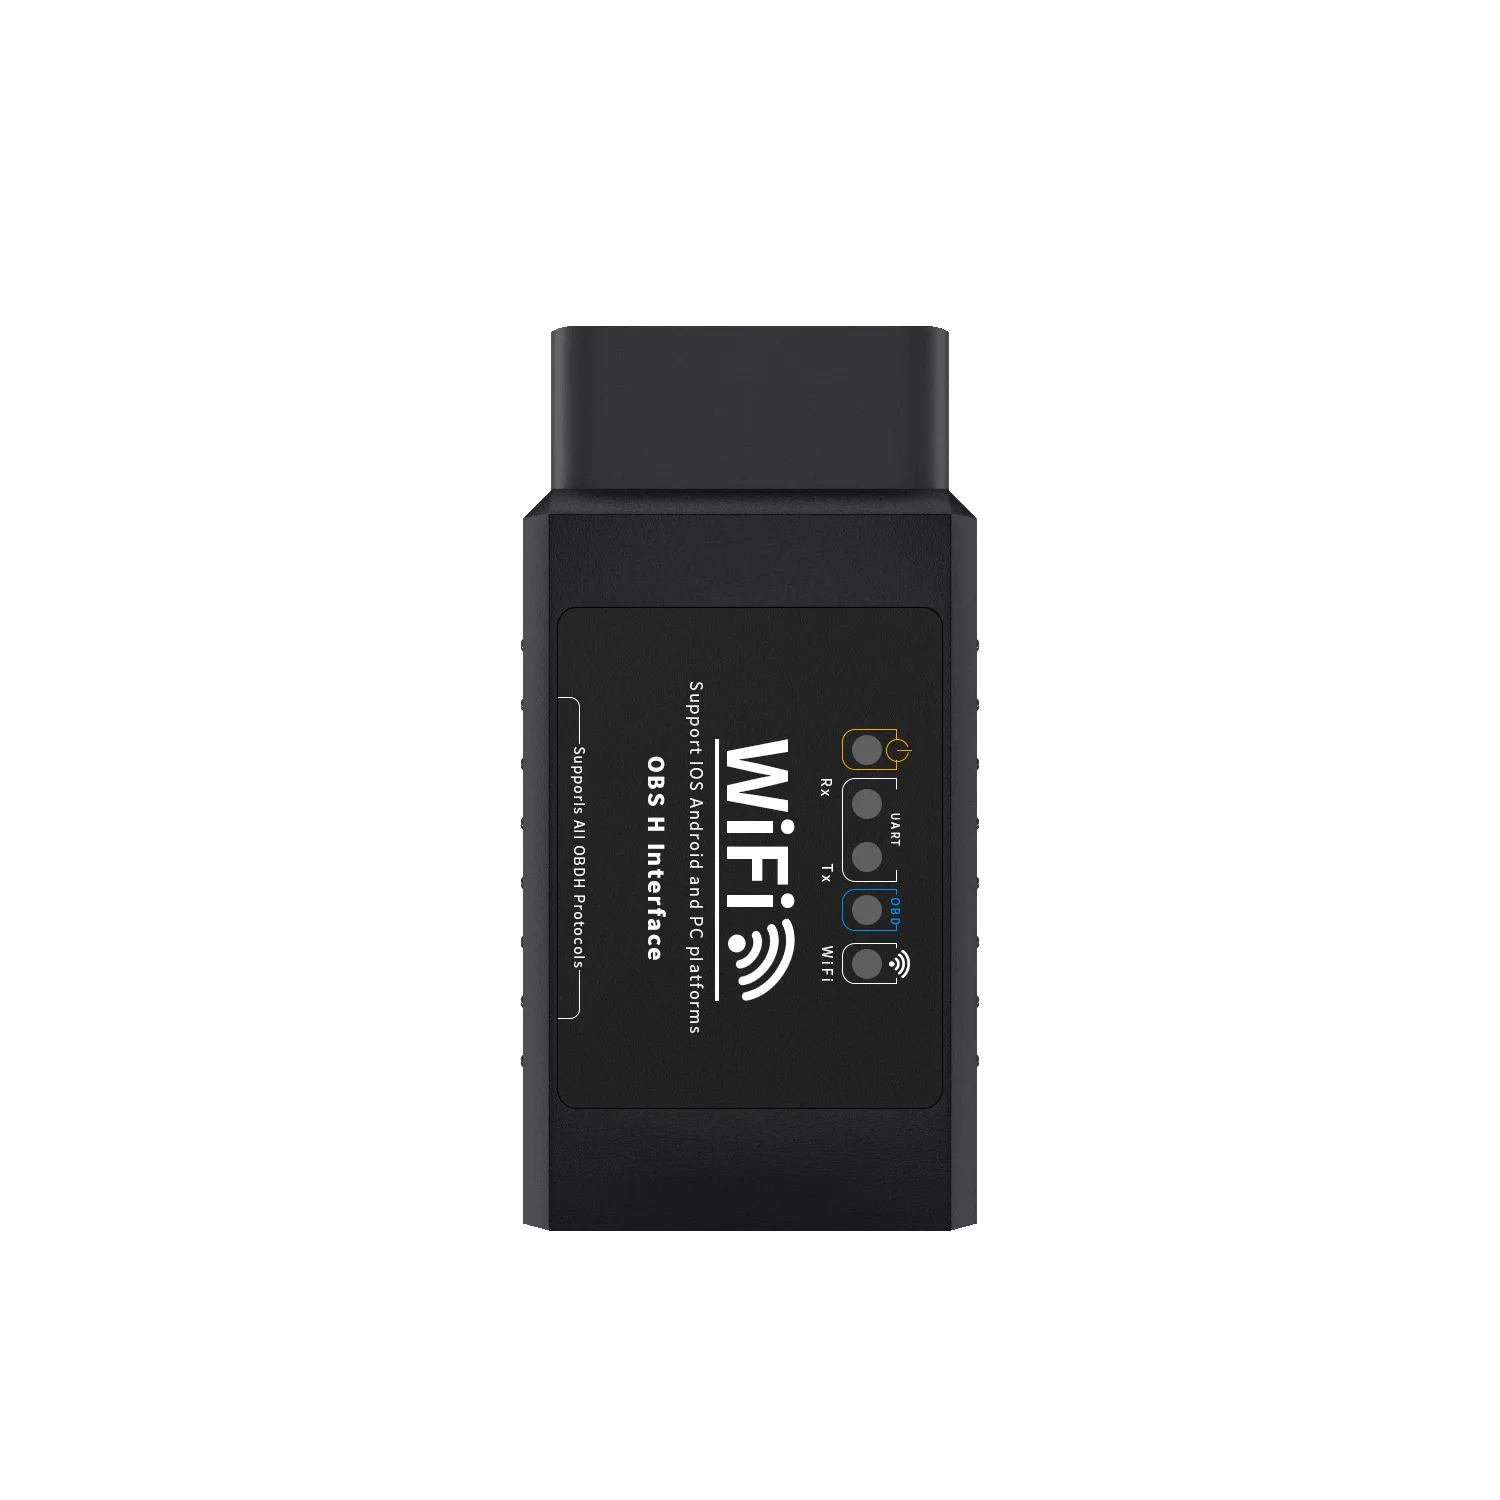 ELM327 WIFI V1.5 car fault detector supports Android and Apple OBD2 foreign trade wholesale